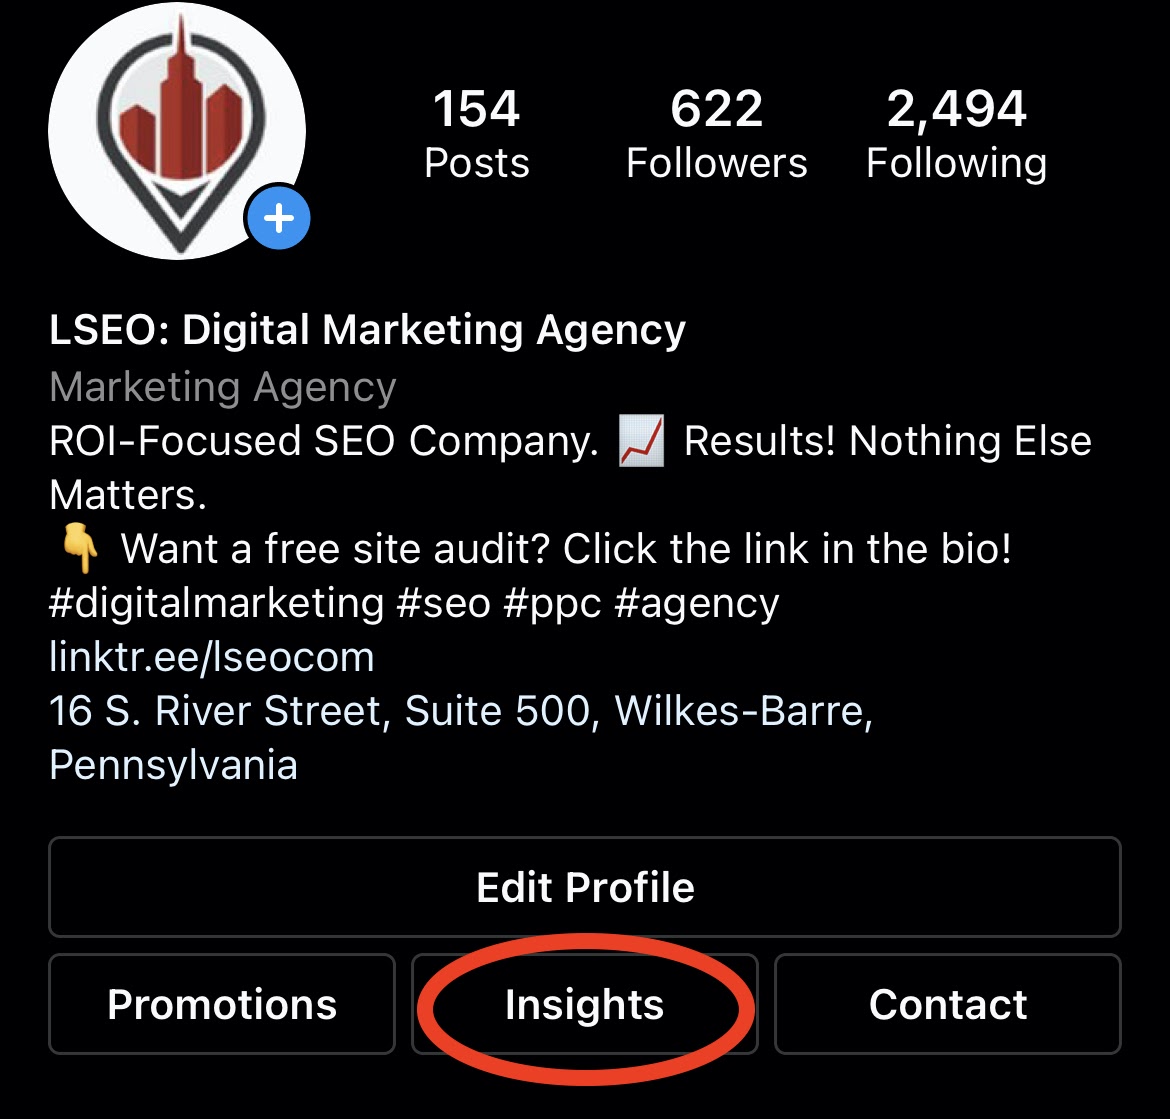 The Instagram Insights Button On LSEO's Profile